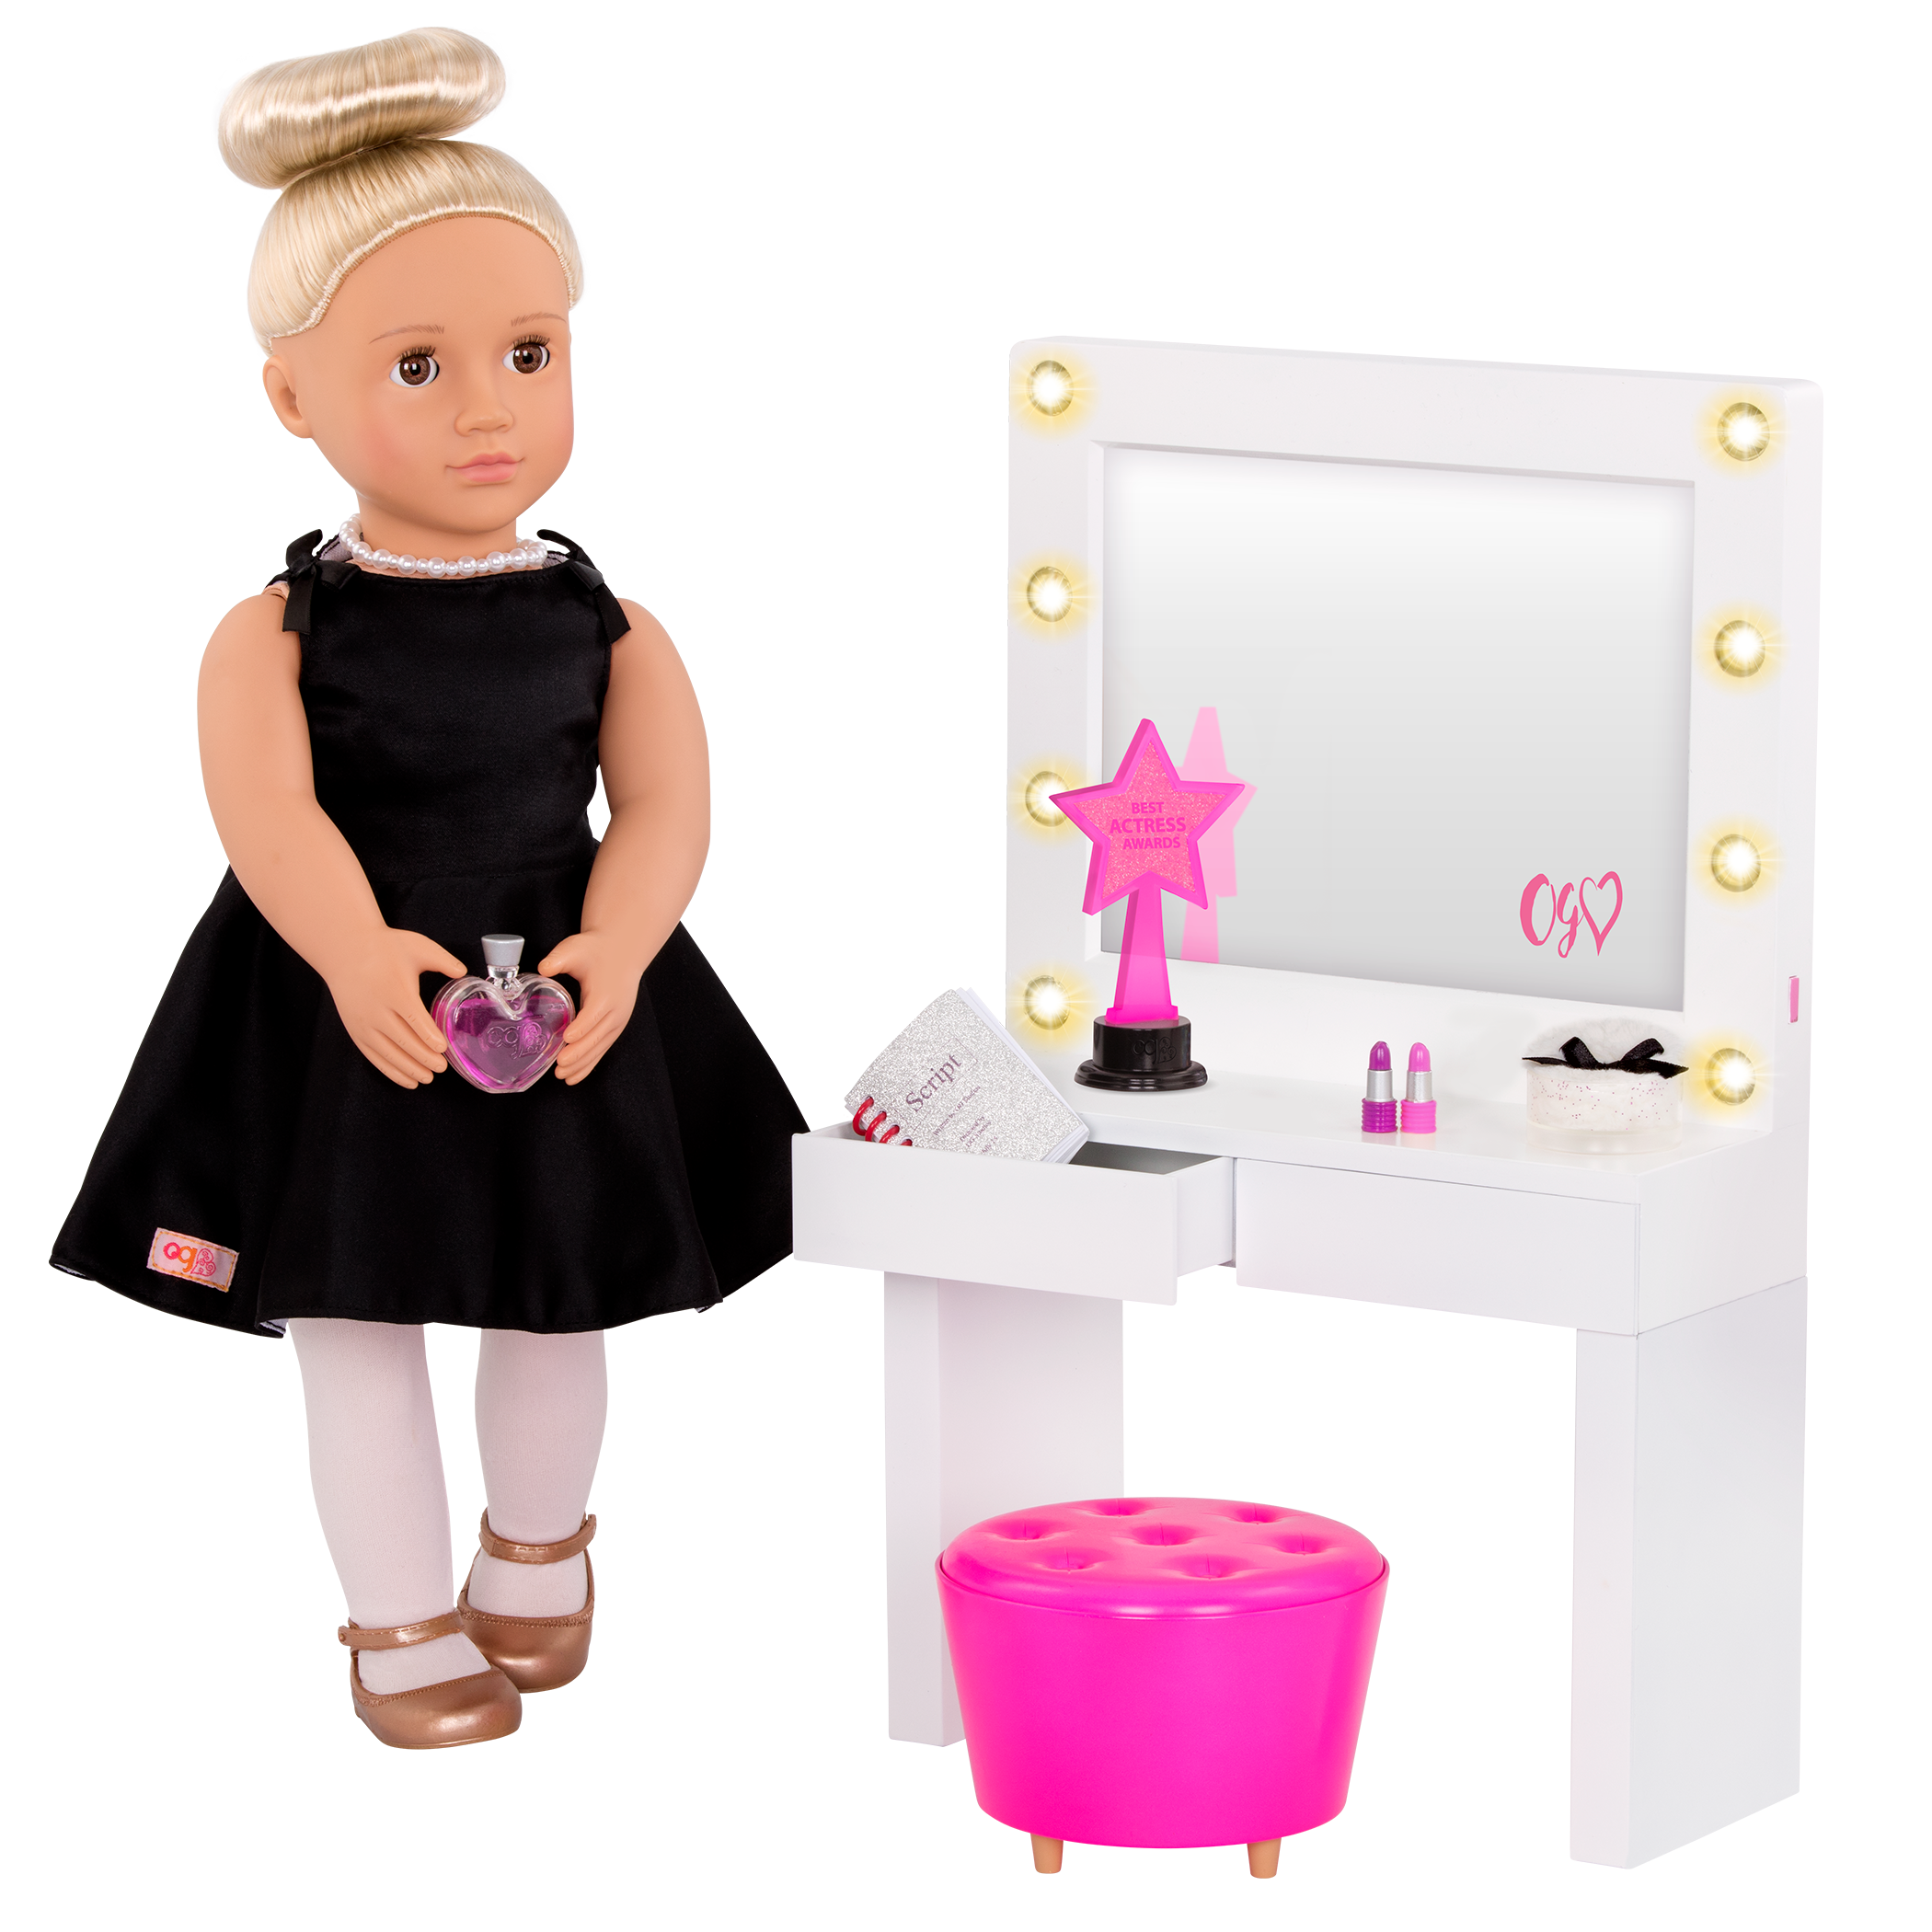 18-inch doll with dressing room playset